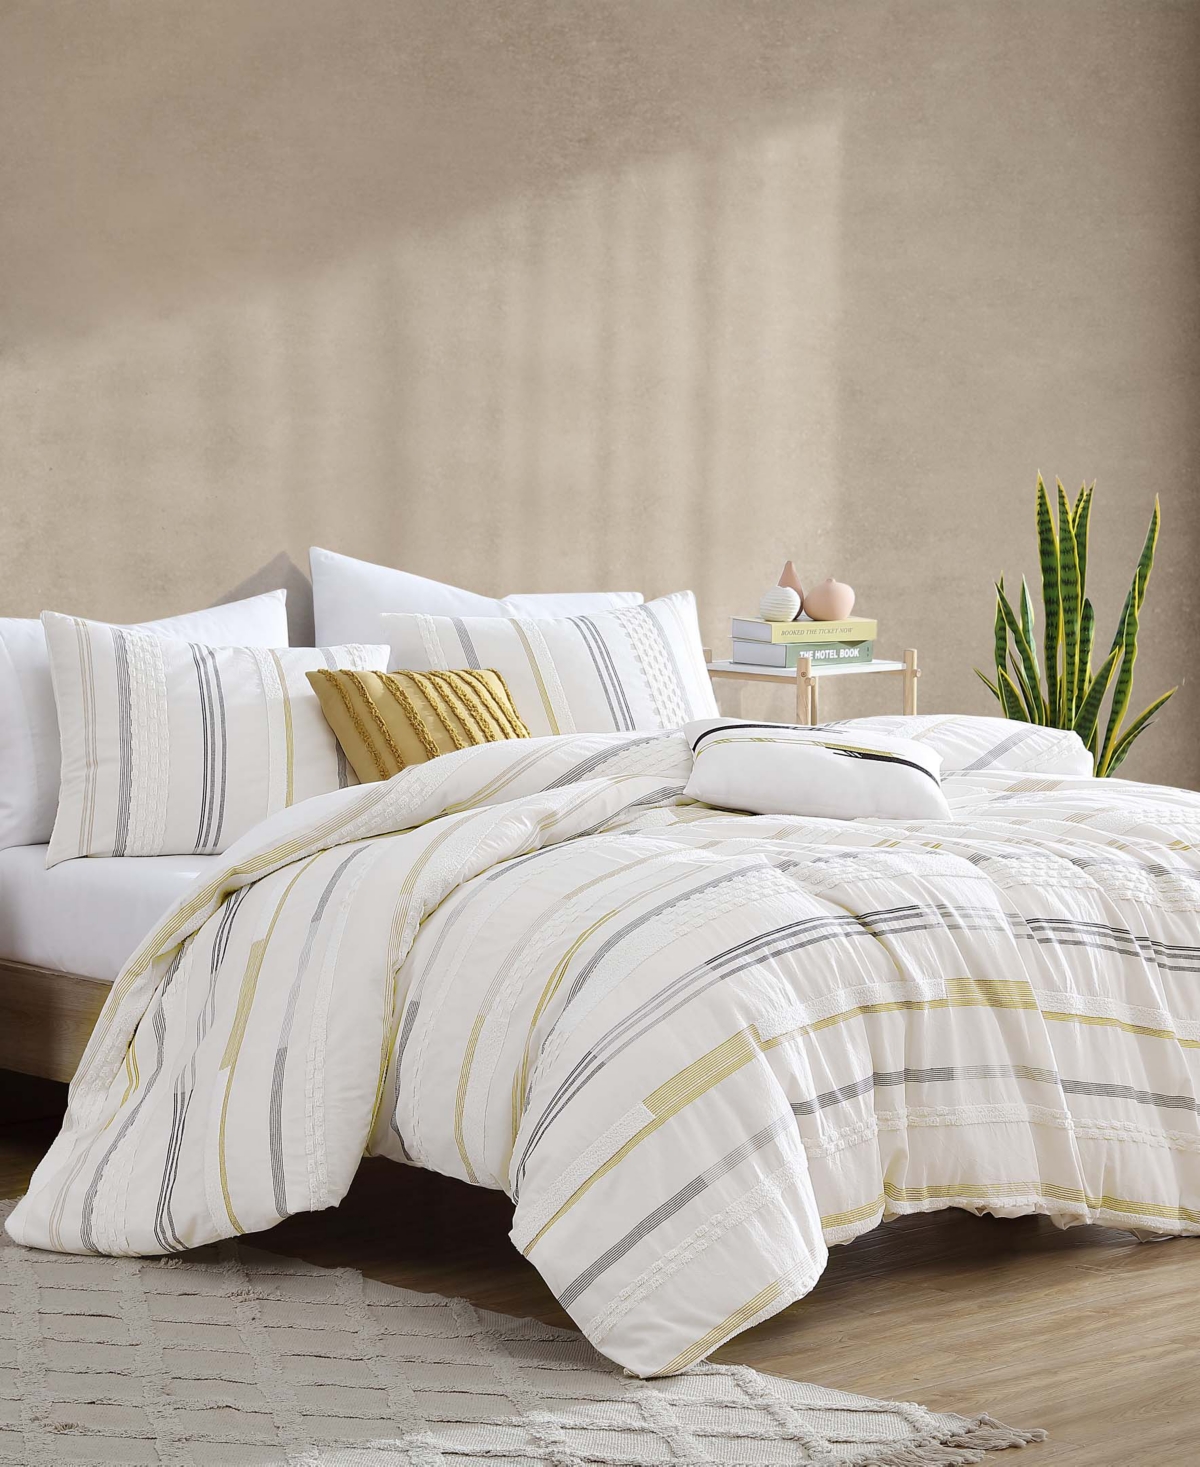 Riverbrook Home Whitten 6-pc. Comforter With Removable Cover Set, King In Ivory,gold,gray